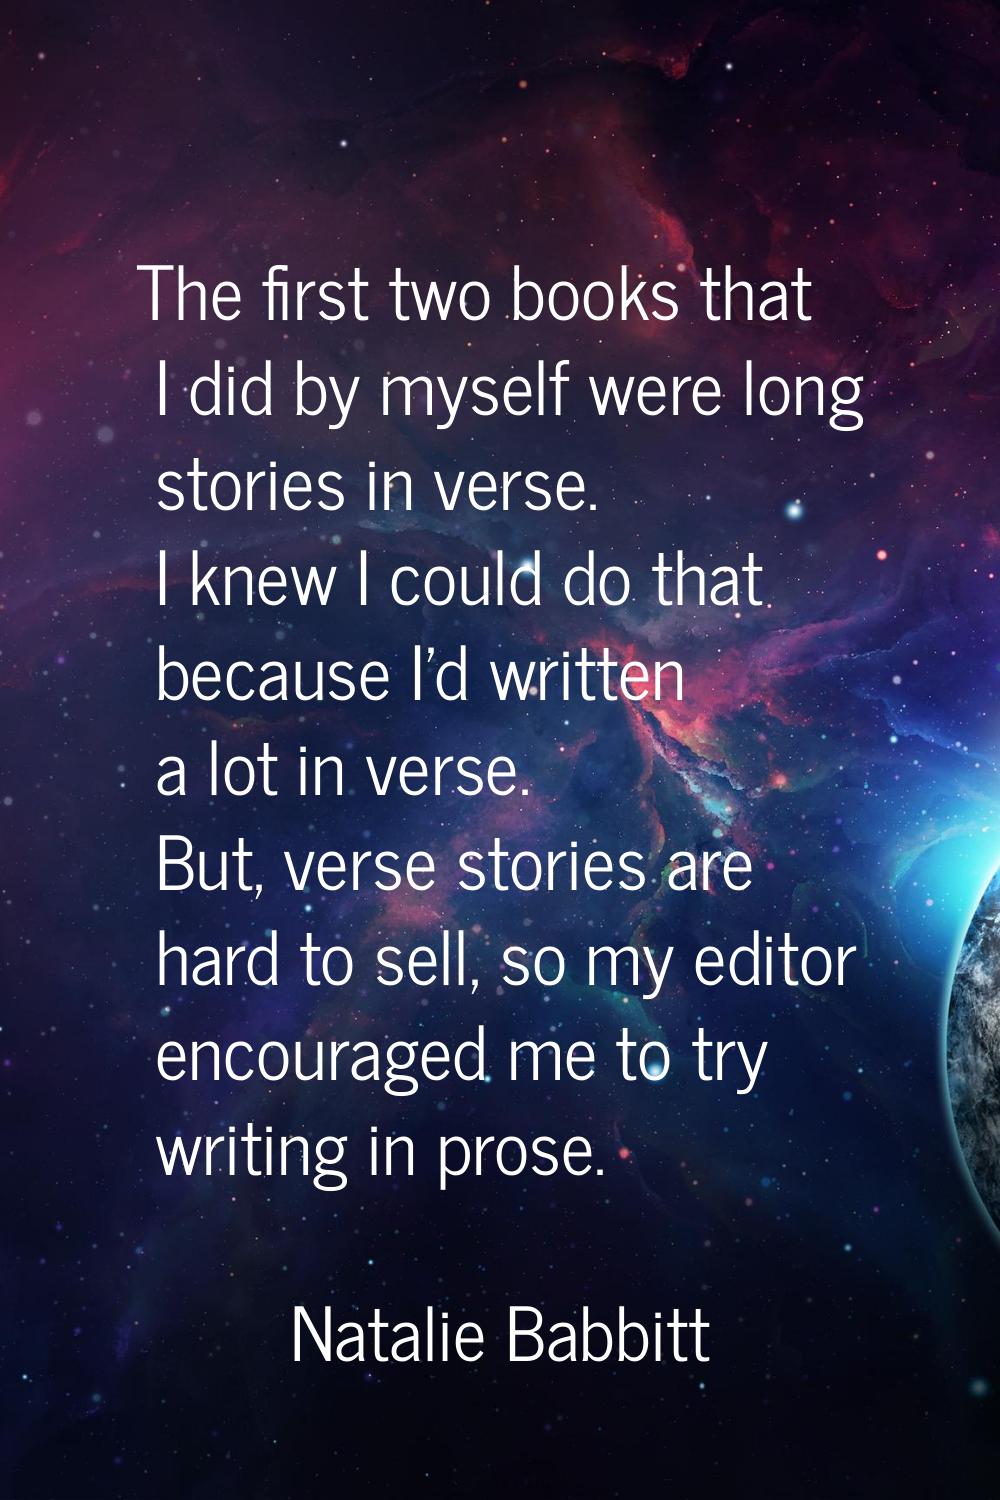 The first two books that I did by myself were long stories in verse. I knew I could do that because